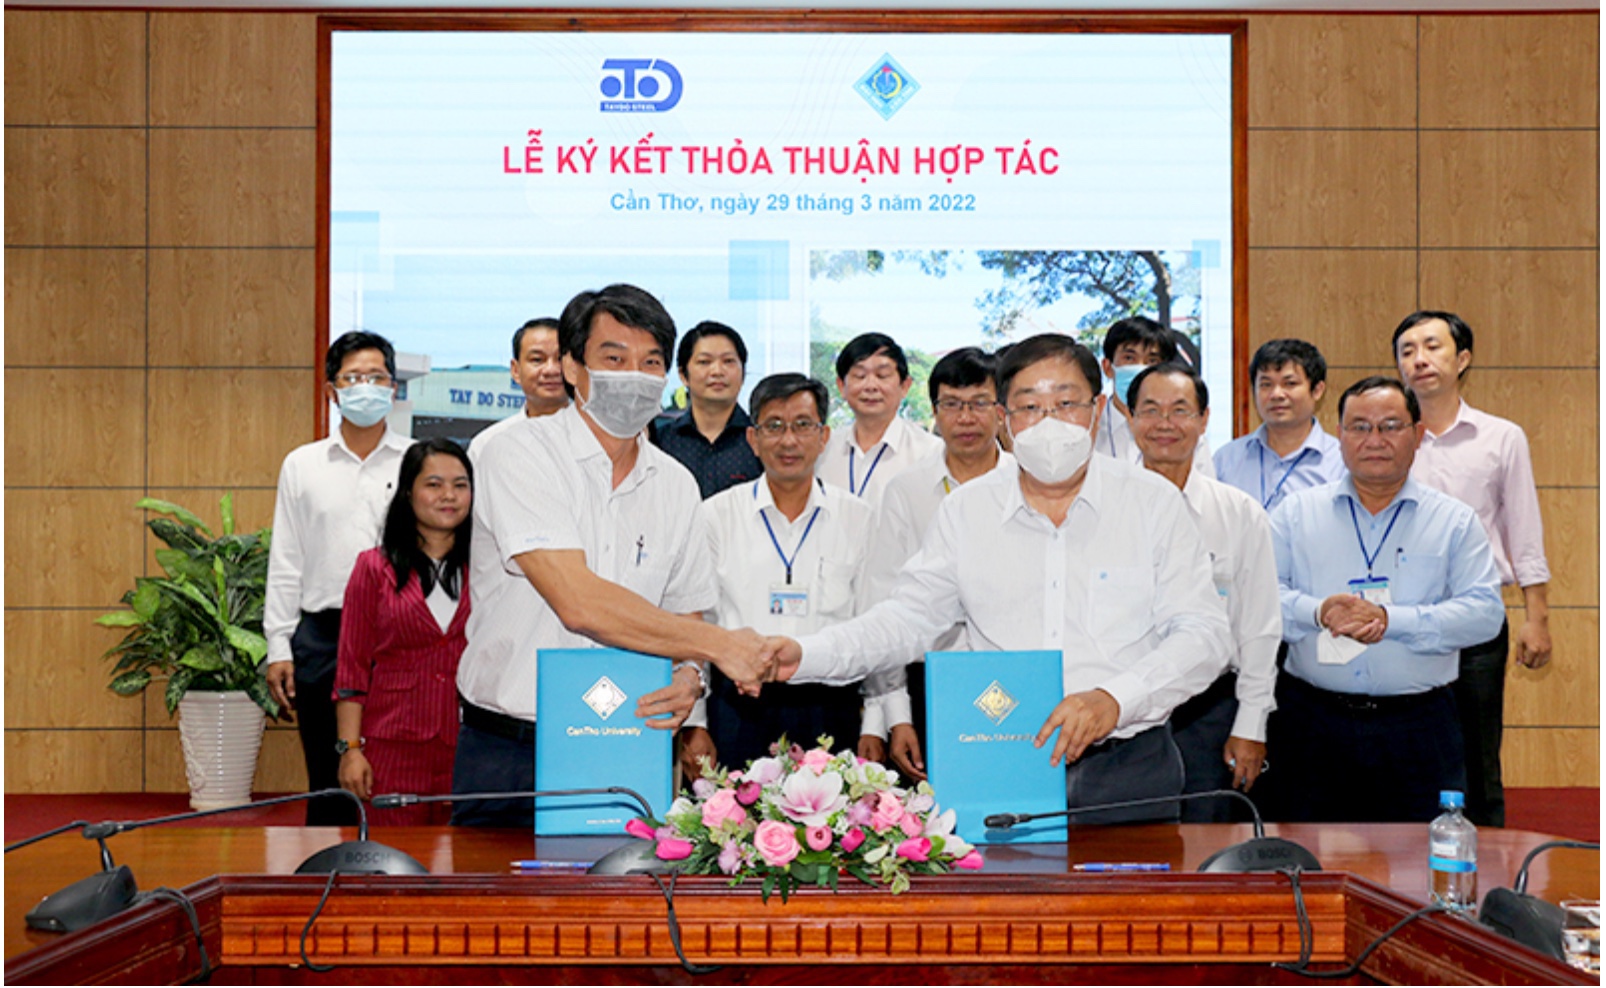 Signing a cooperation agreement between Tay Do Steel Company and Can Tho University